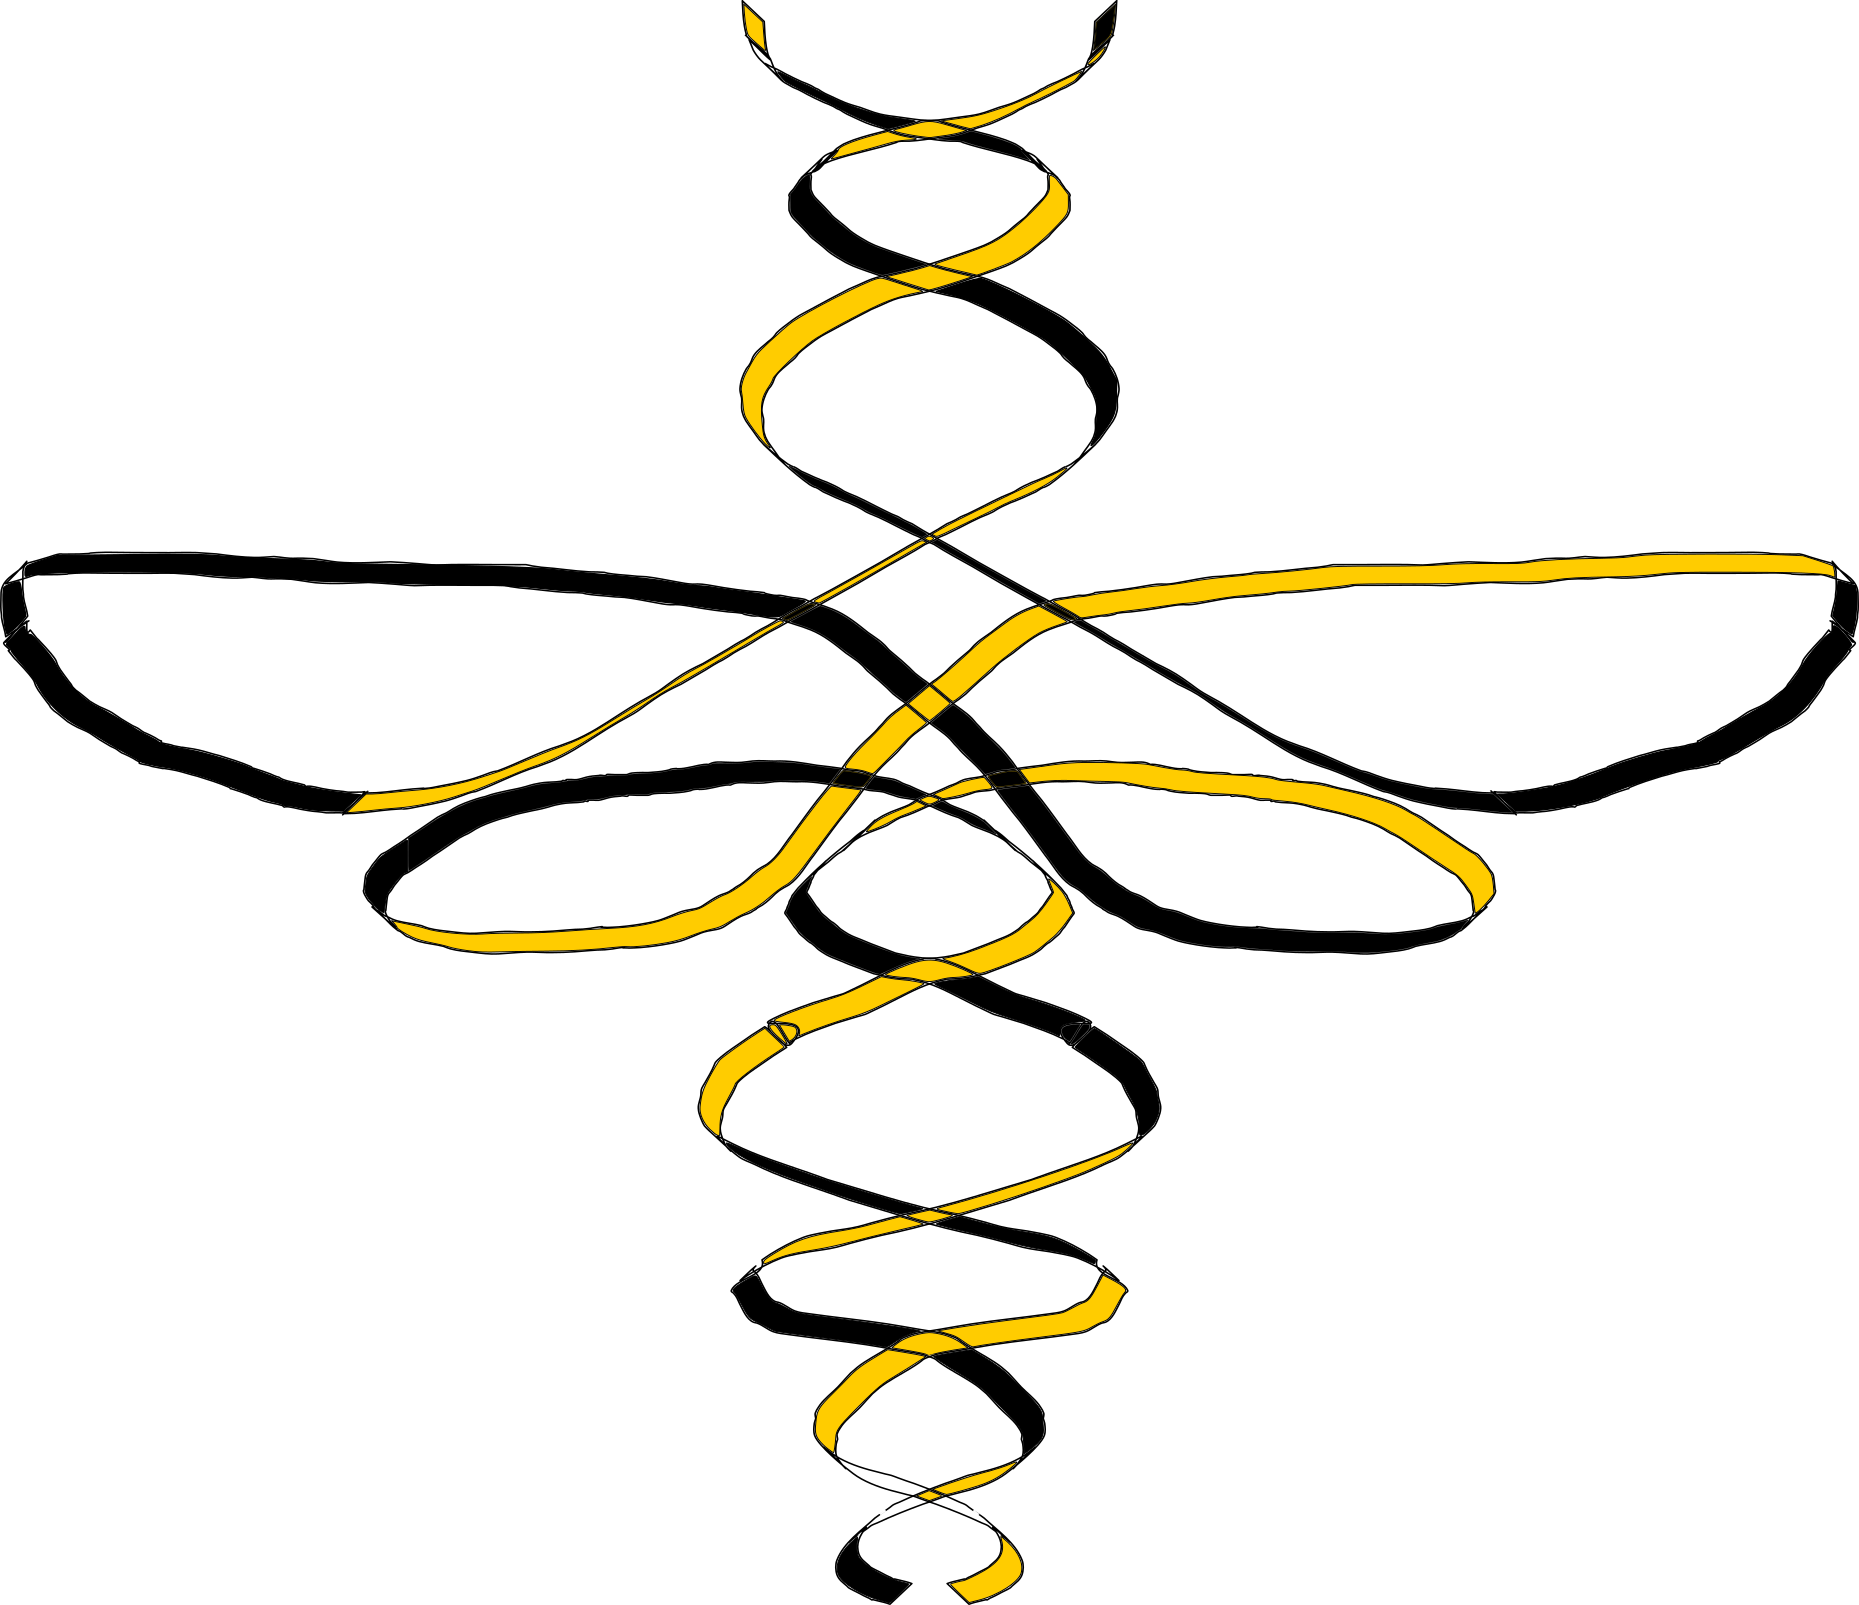 Sketch of a stylised bee made of a helix-like ribbon